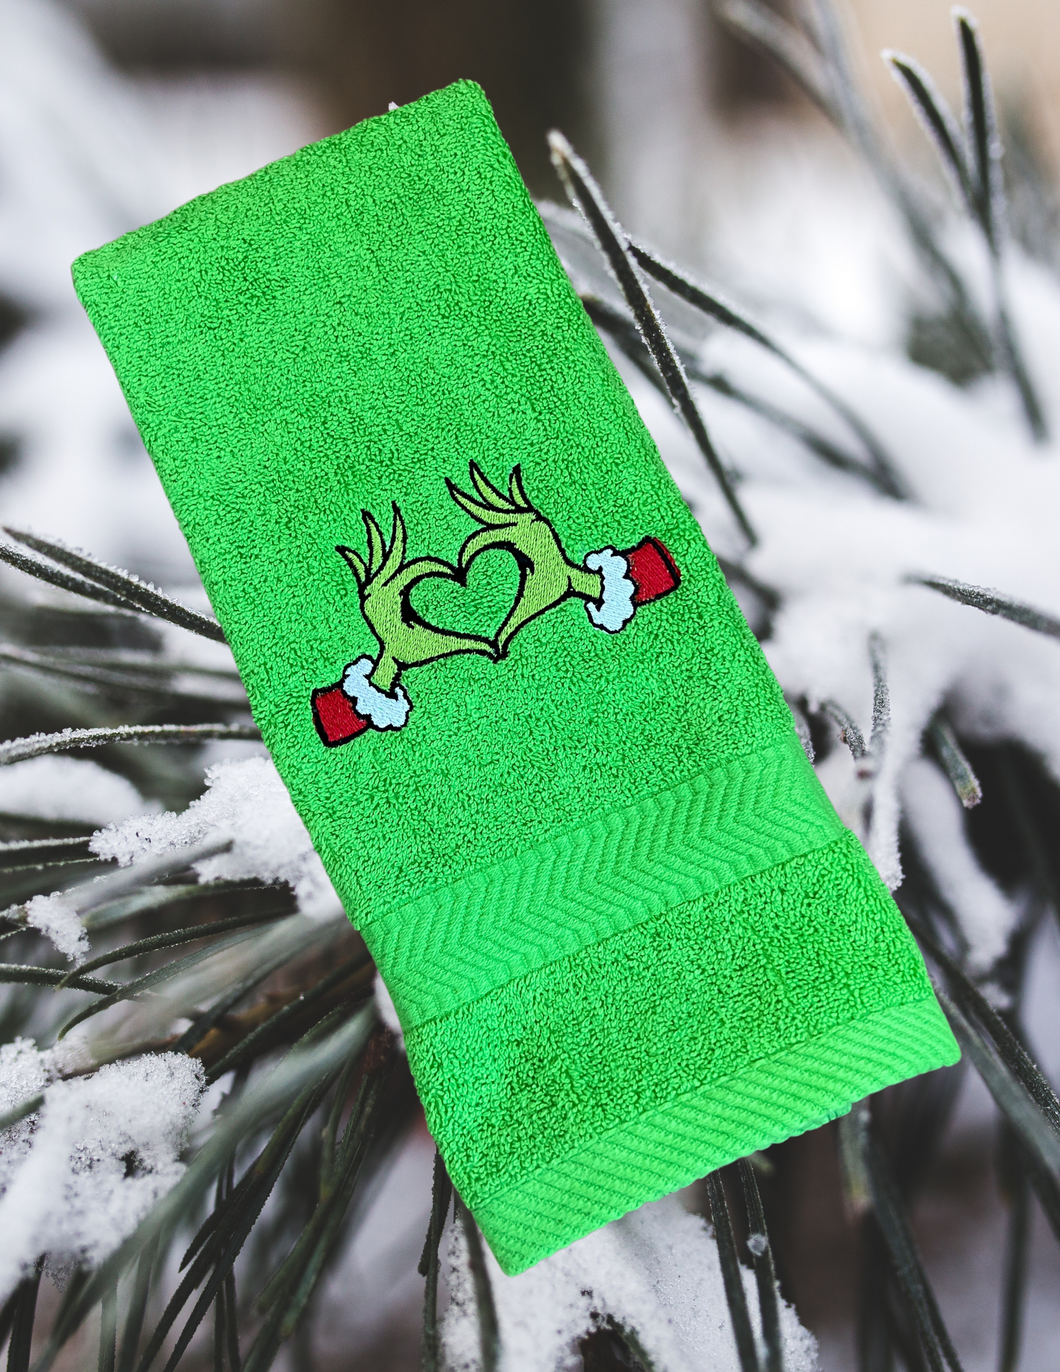 Hand Towel - Green Mean Hands and Heart